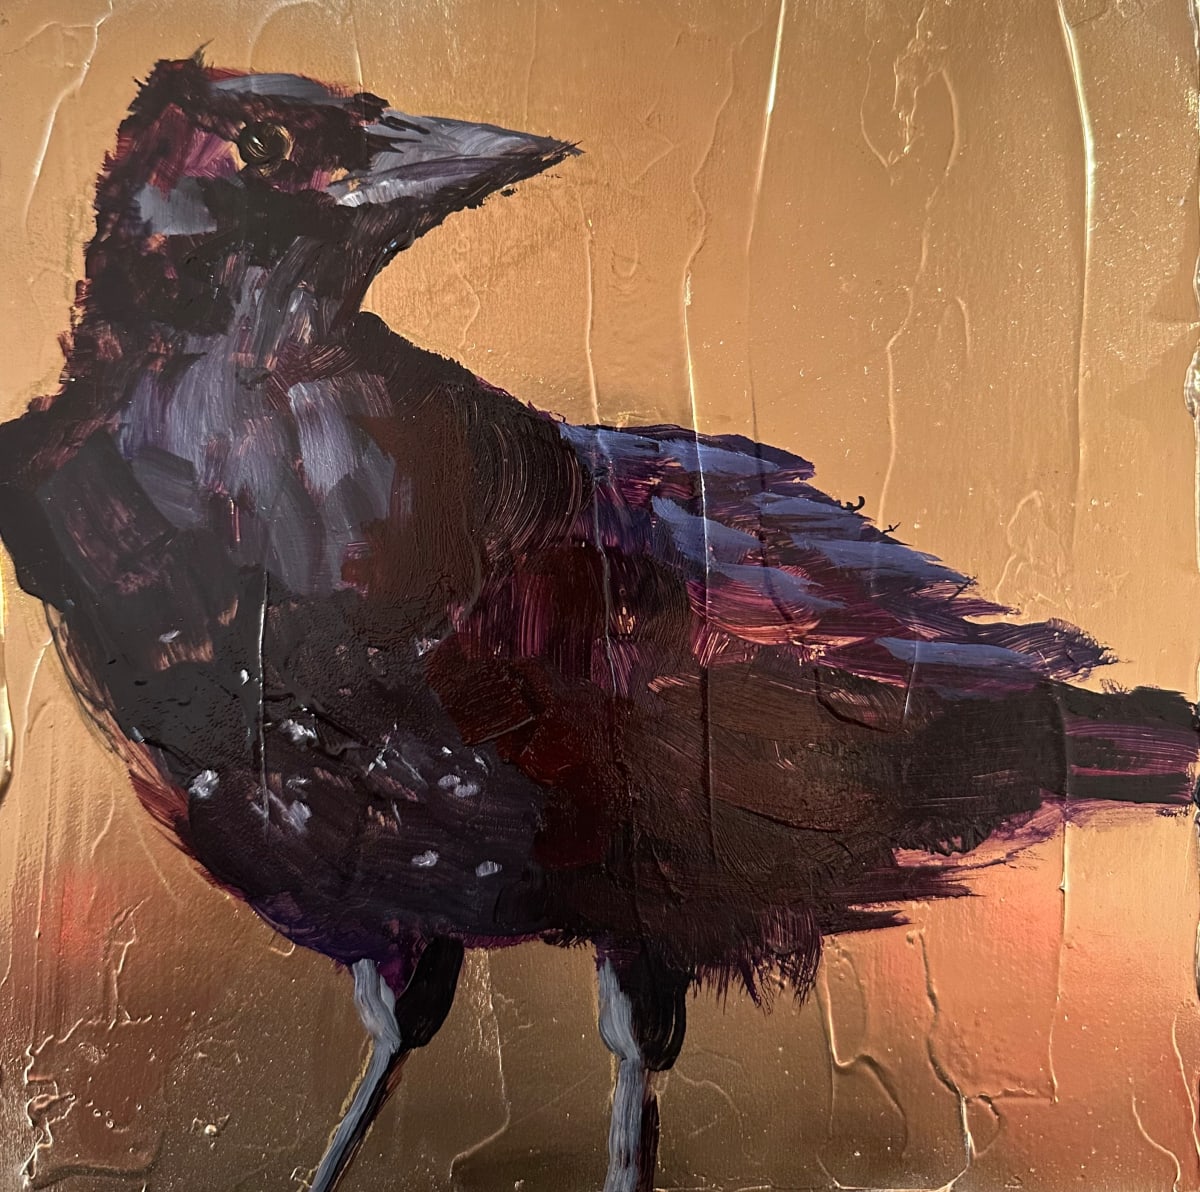 The Crow by susan tyler  Image: one of the wonderful crows from Cuvee"